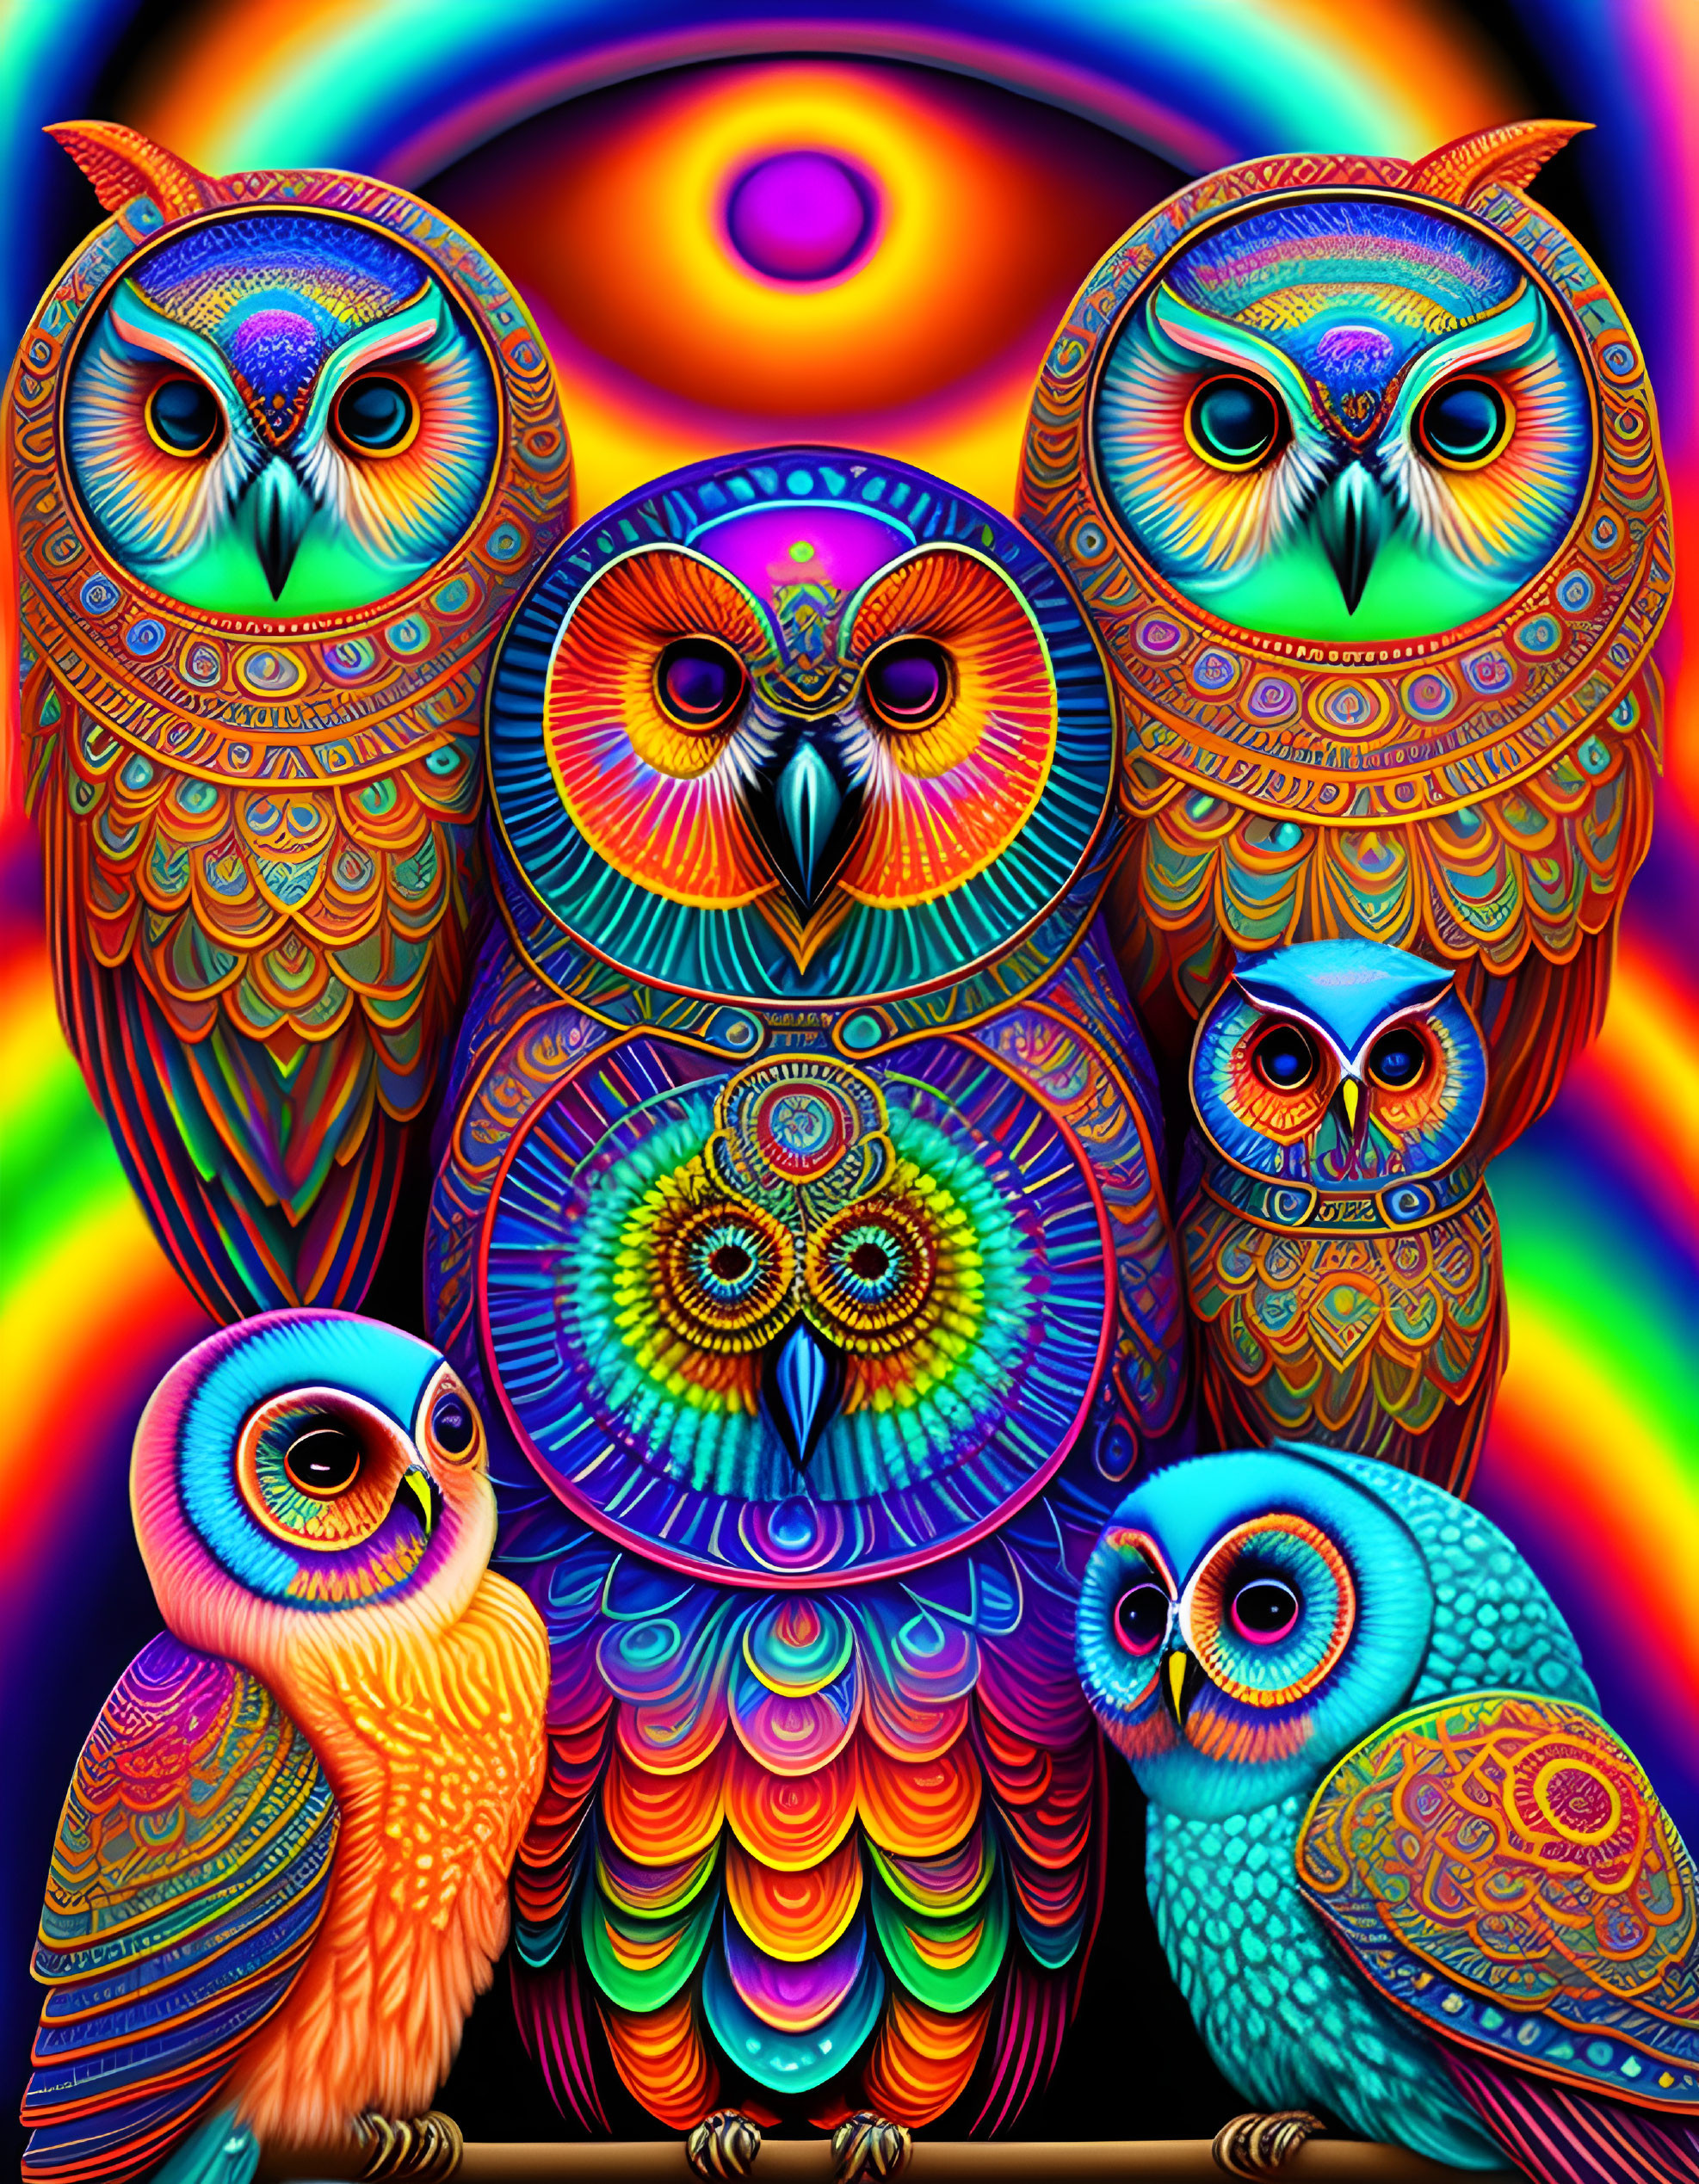 Owl family psychedelic in space 